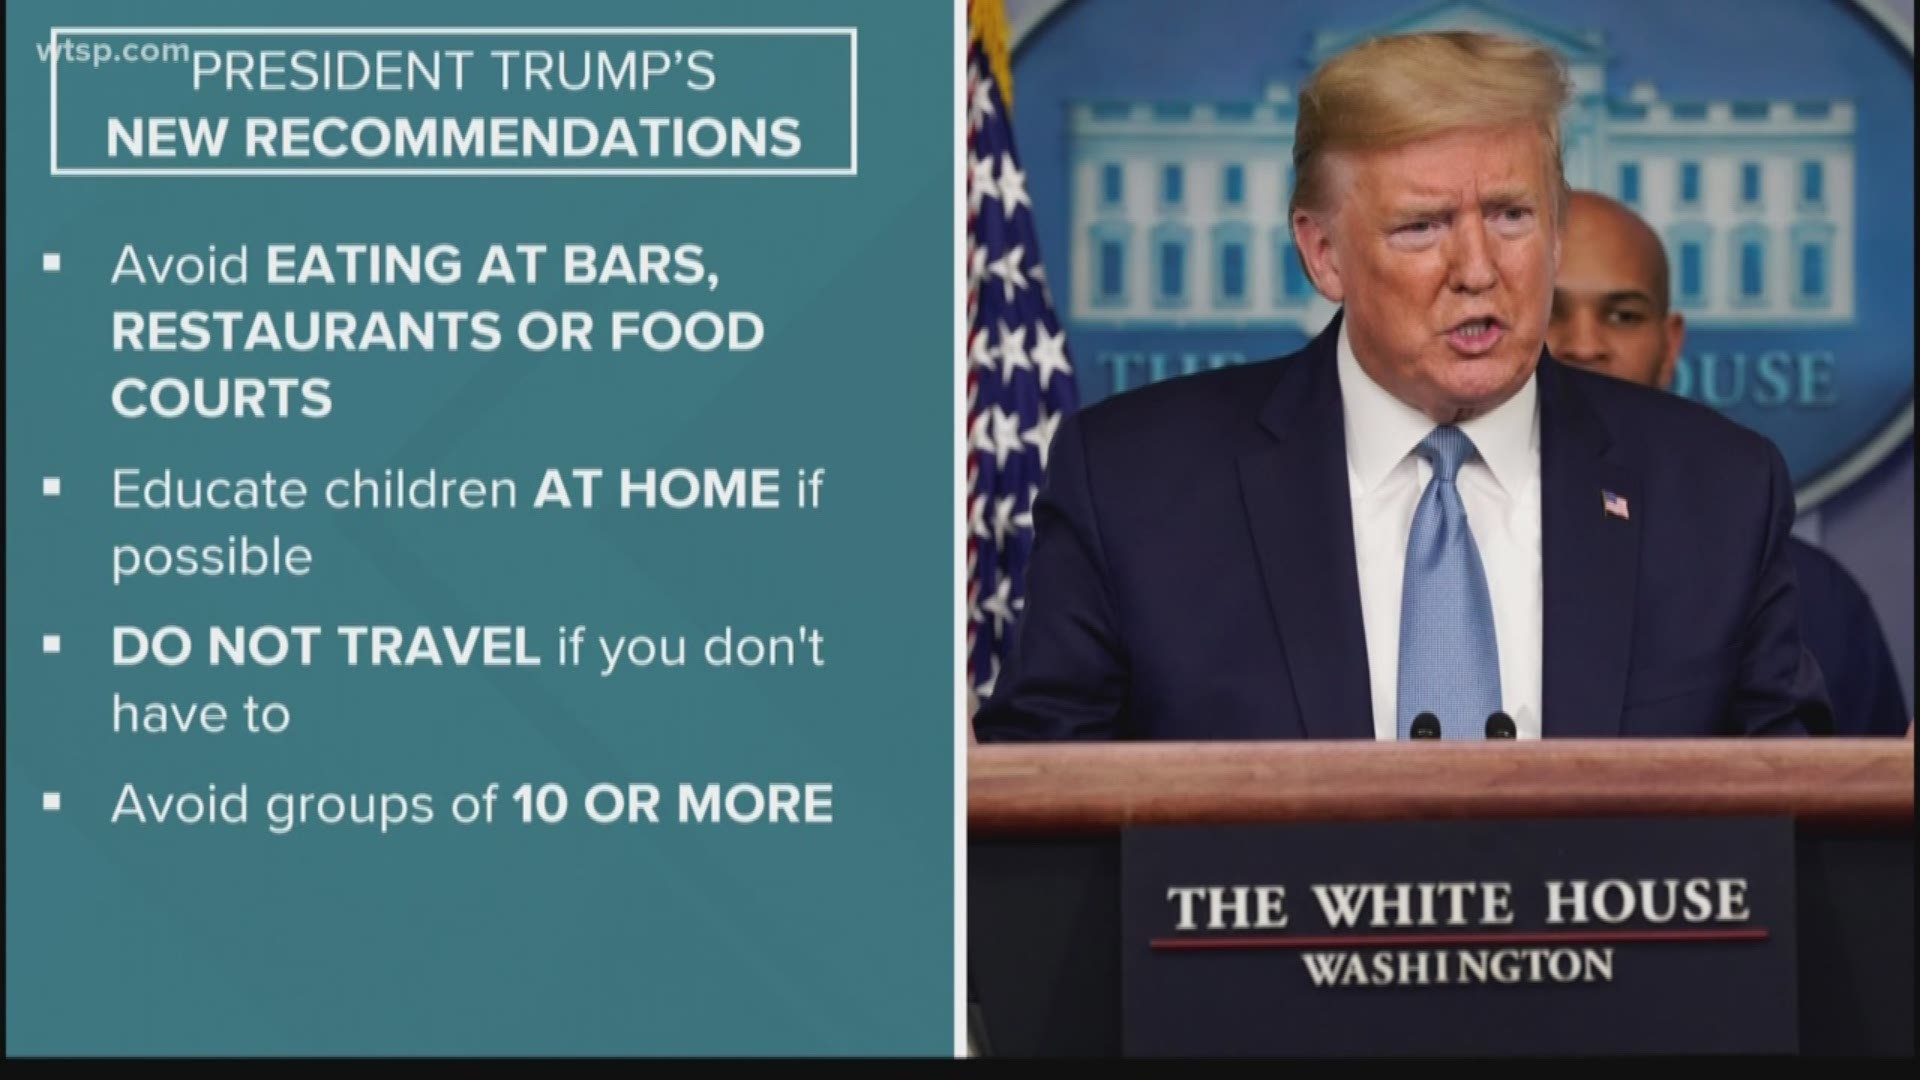 For the next 15 days, the White House is recommending everyone work from home, avoid bars and restaurants, and avoid groups of more than ten people.